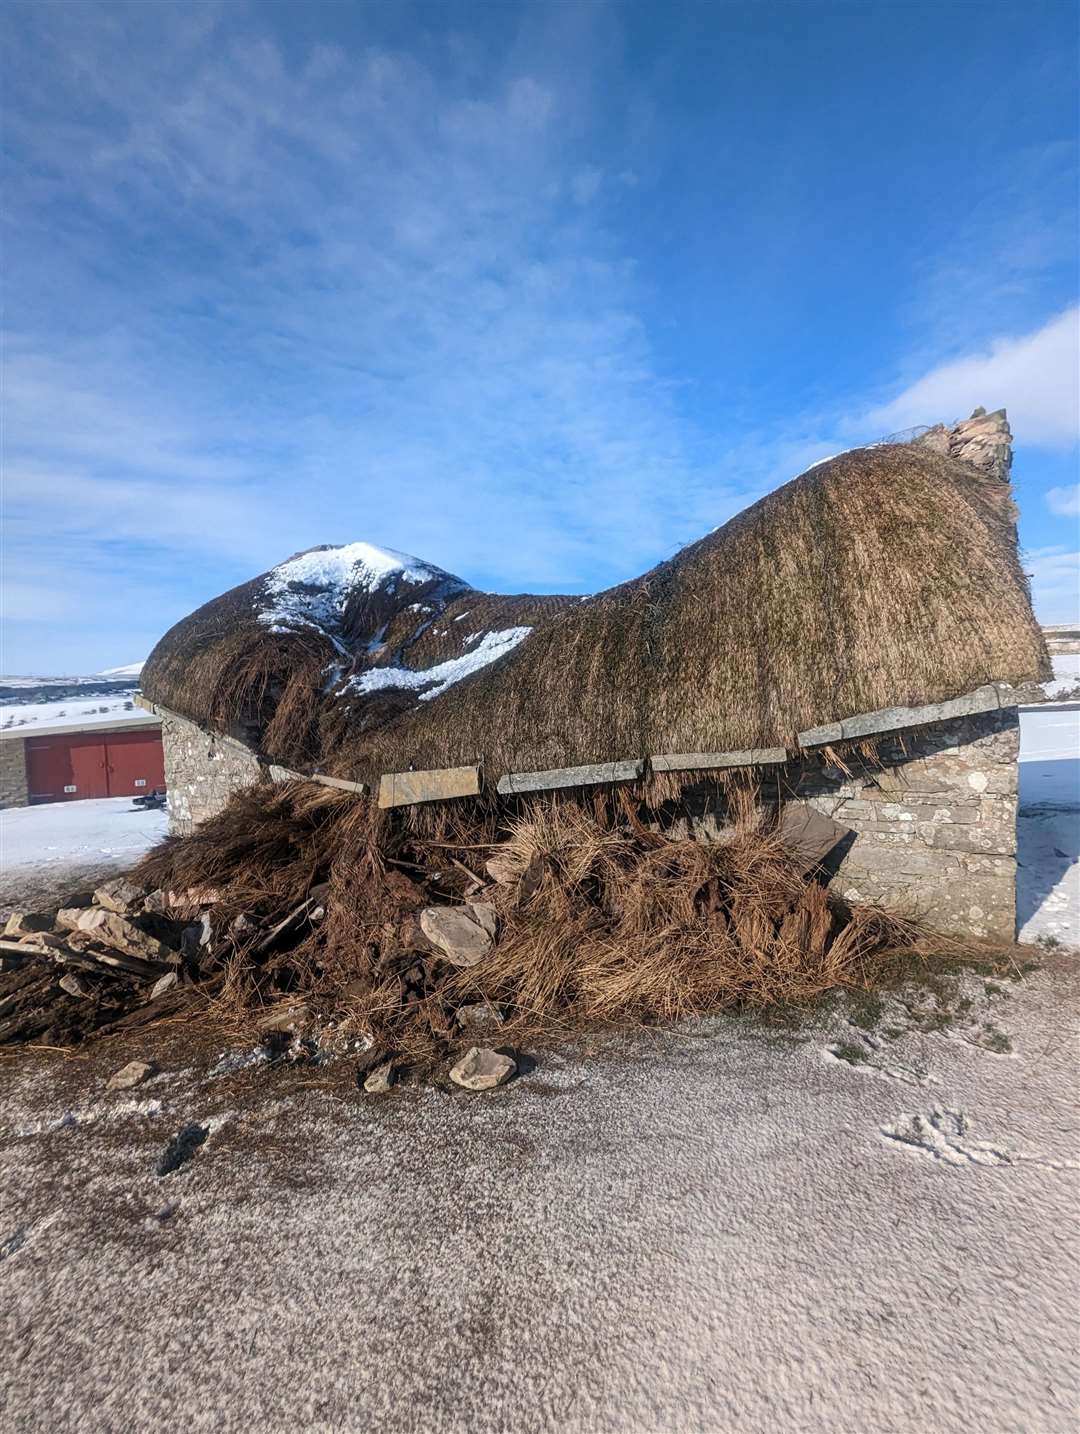 The roof of the Laidhay Barn collapsed under the snow.